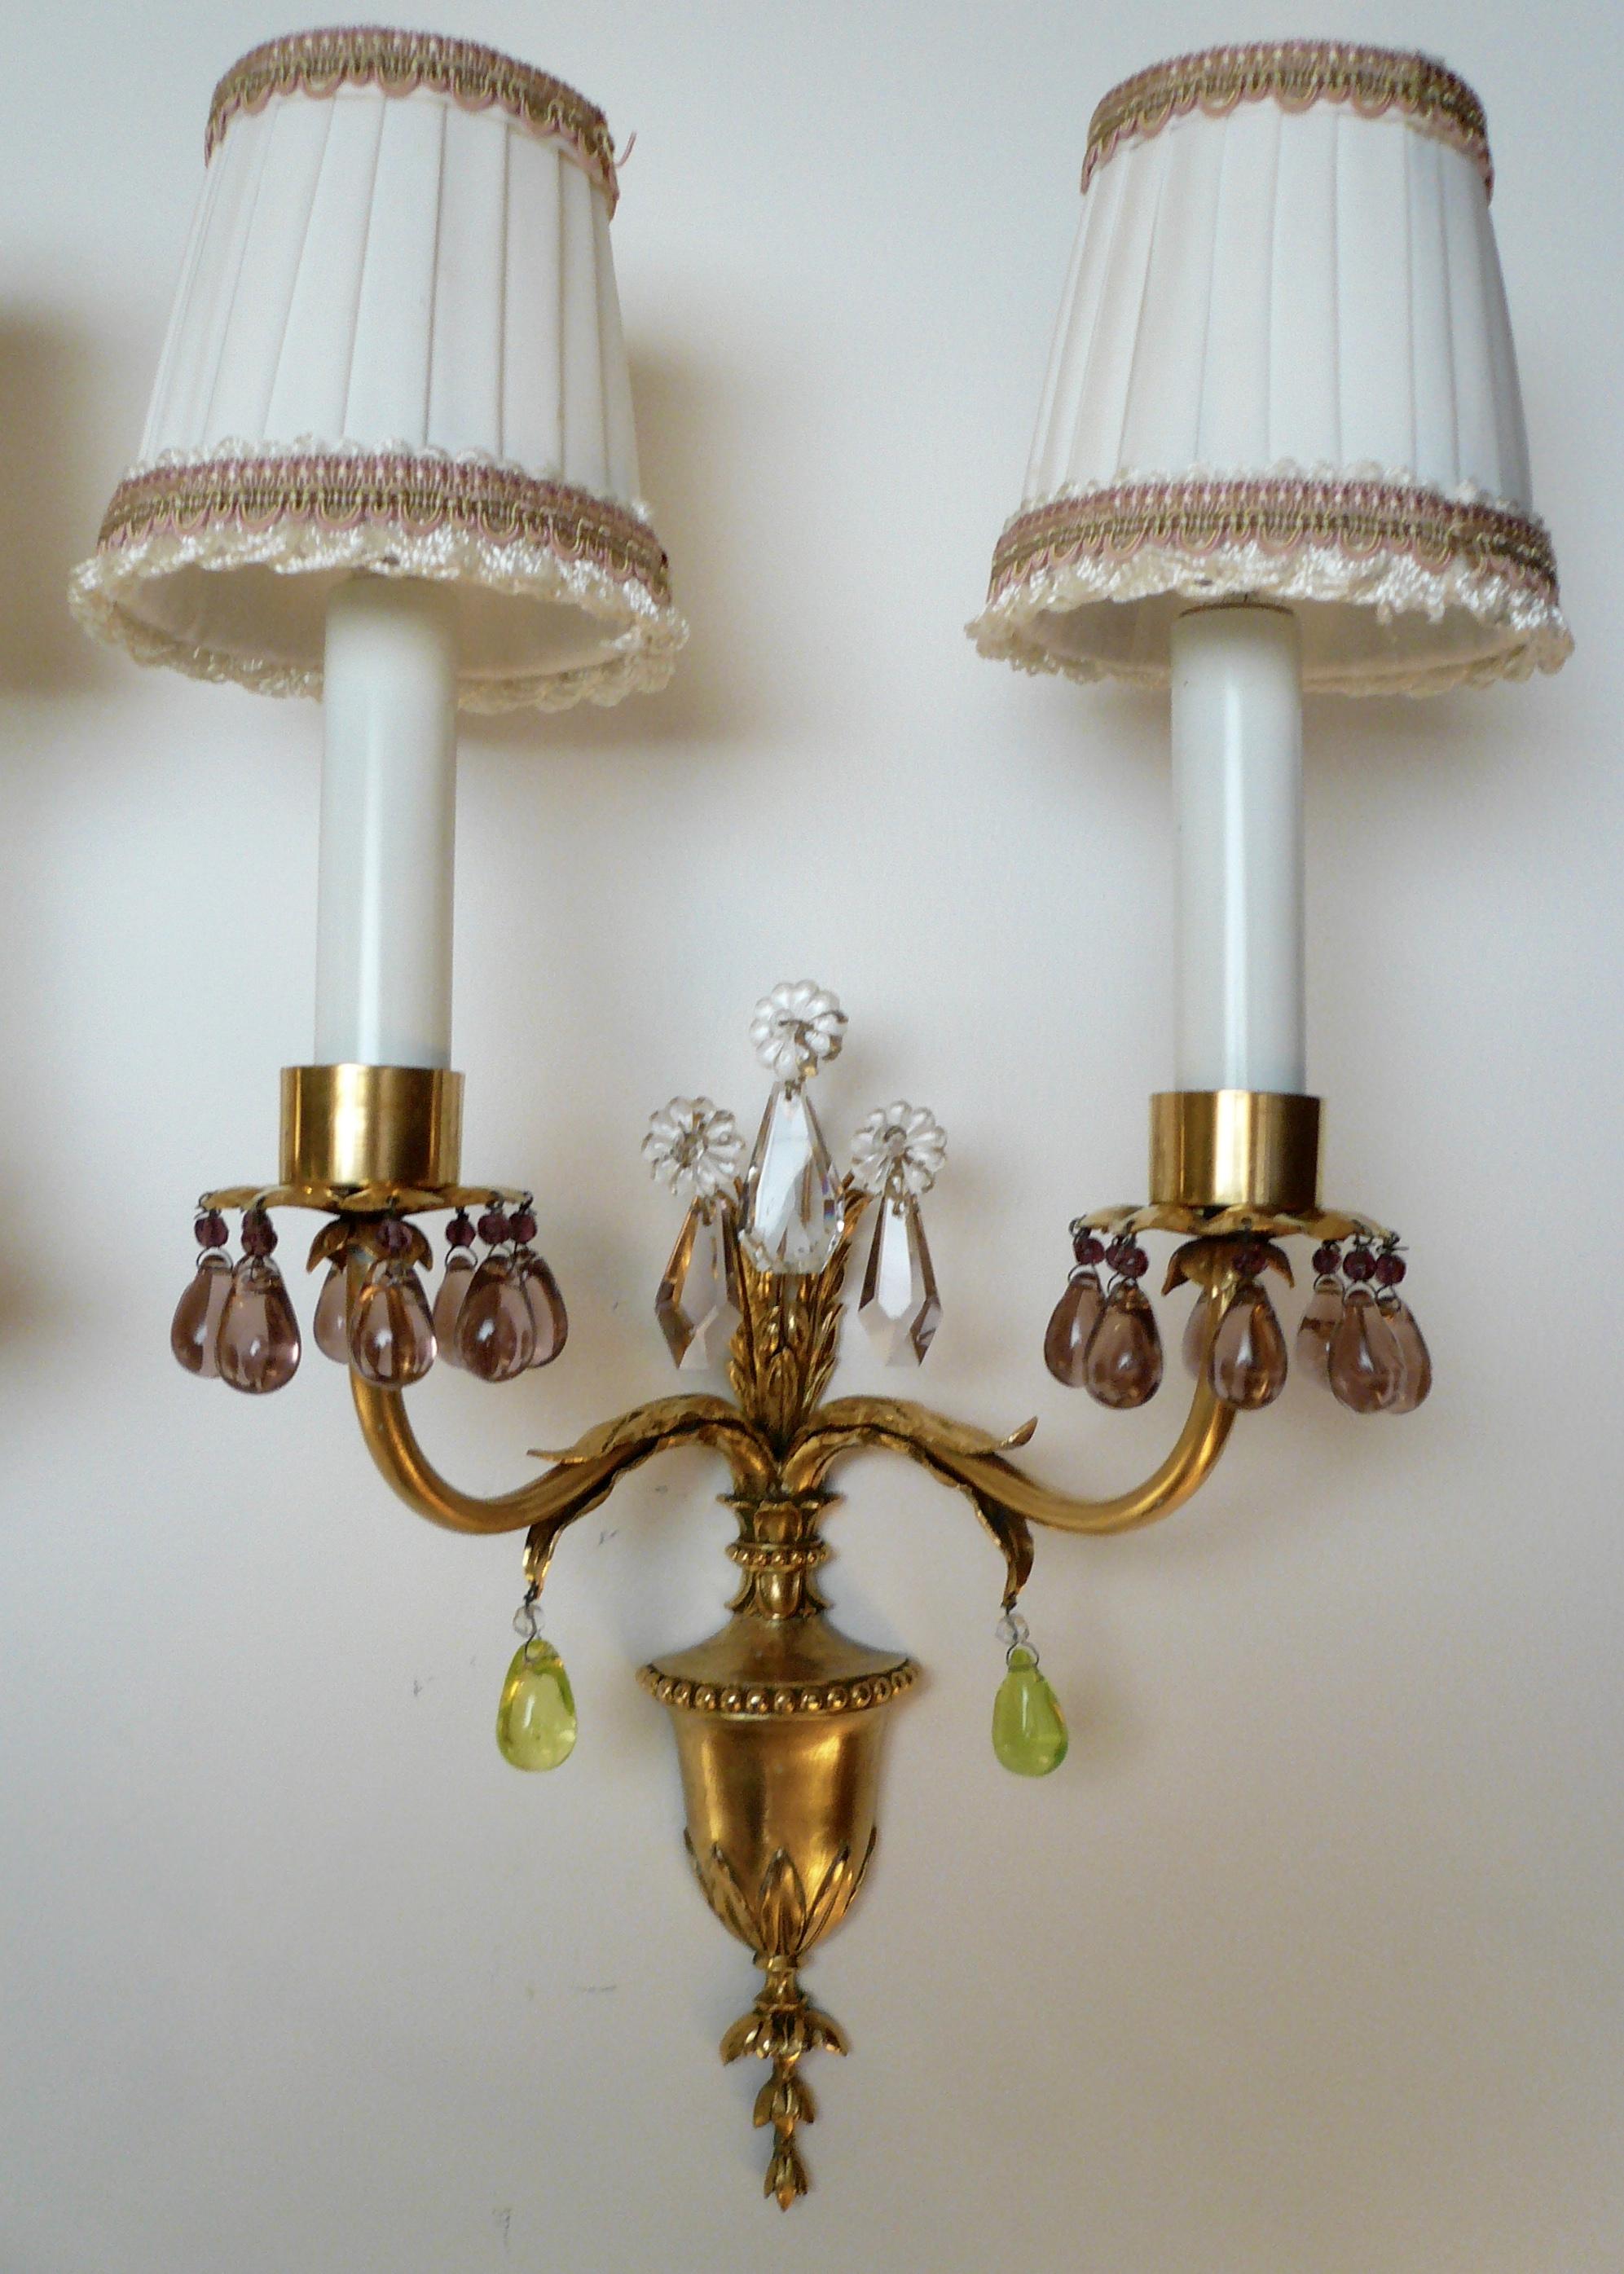 These beautiful Caldwell sconces feature Classical motifs including bellflowers and acanthus leaves. They are hung with the original amethyst and citrine colored prisms.
 